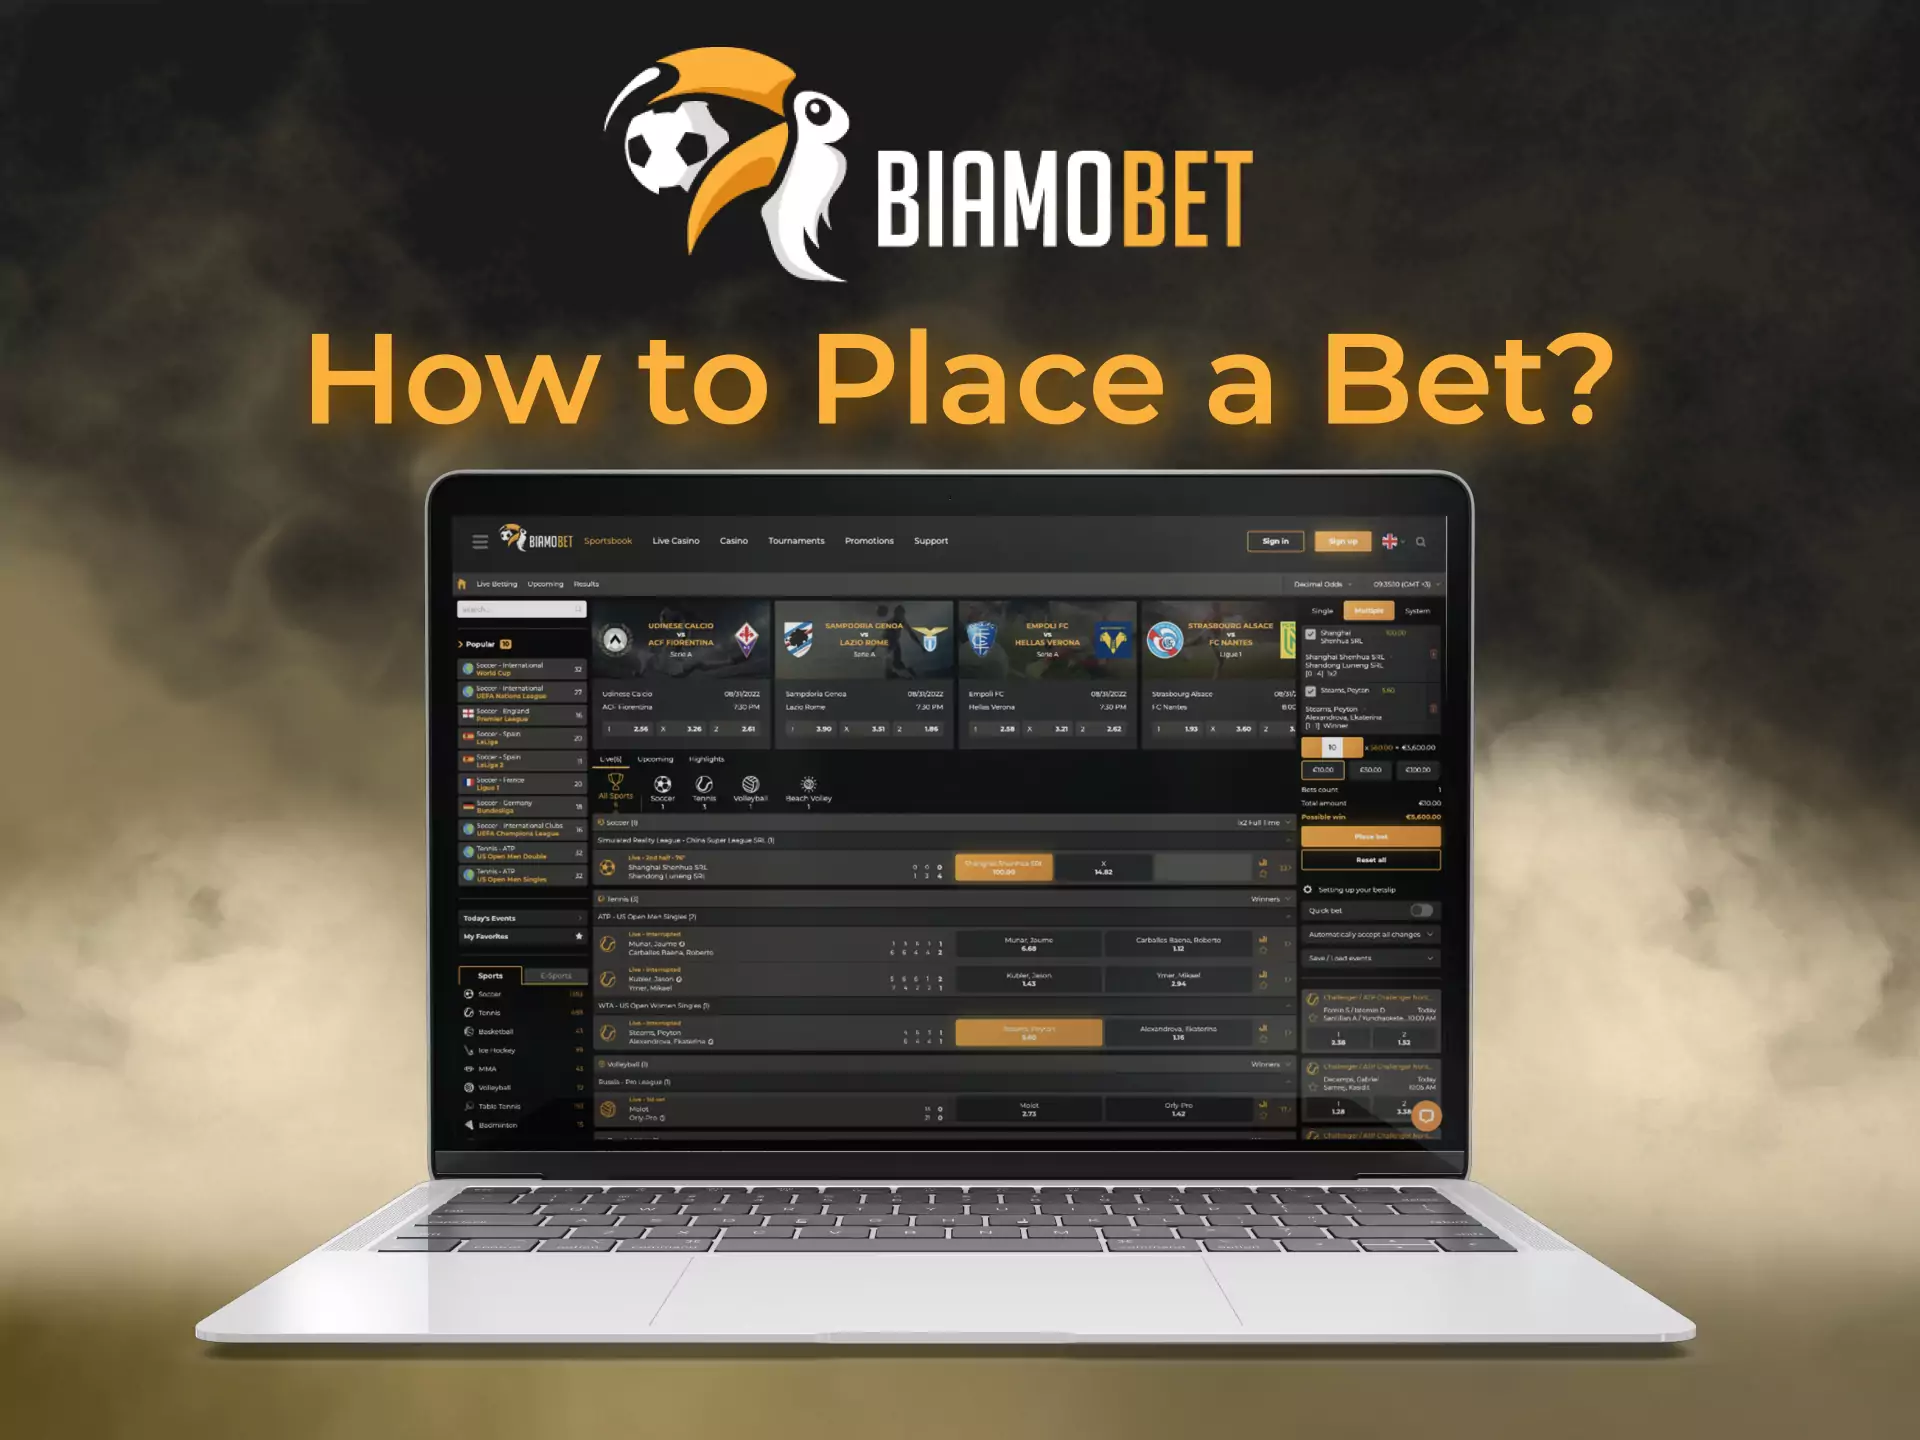 Choose a match, make a prediction and confirm a bet on Biamobet.